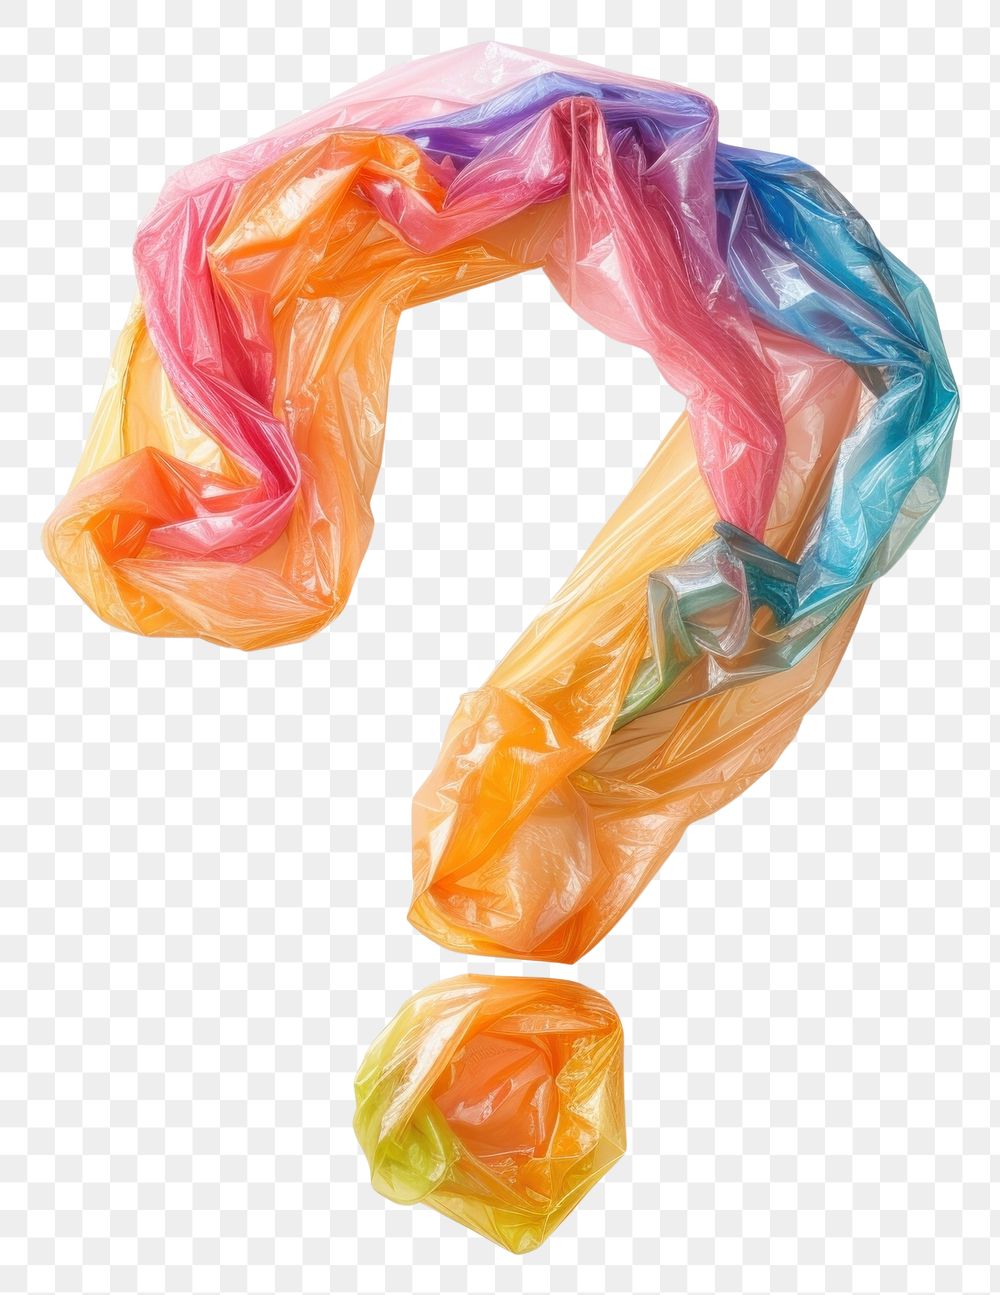 PNG Plastic bag question mark white background confectionery creativity.